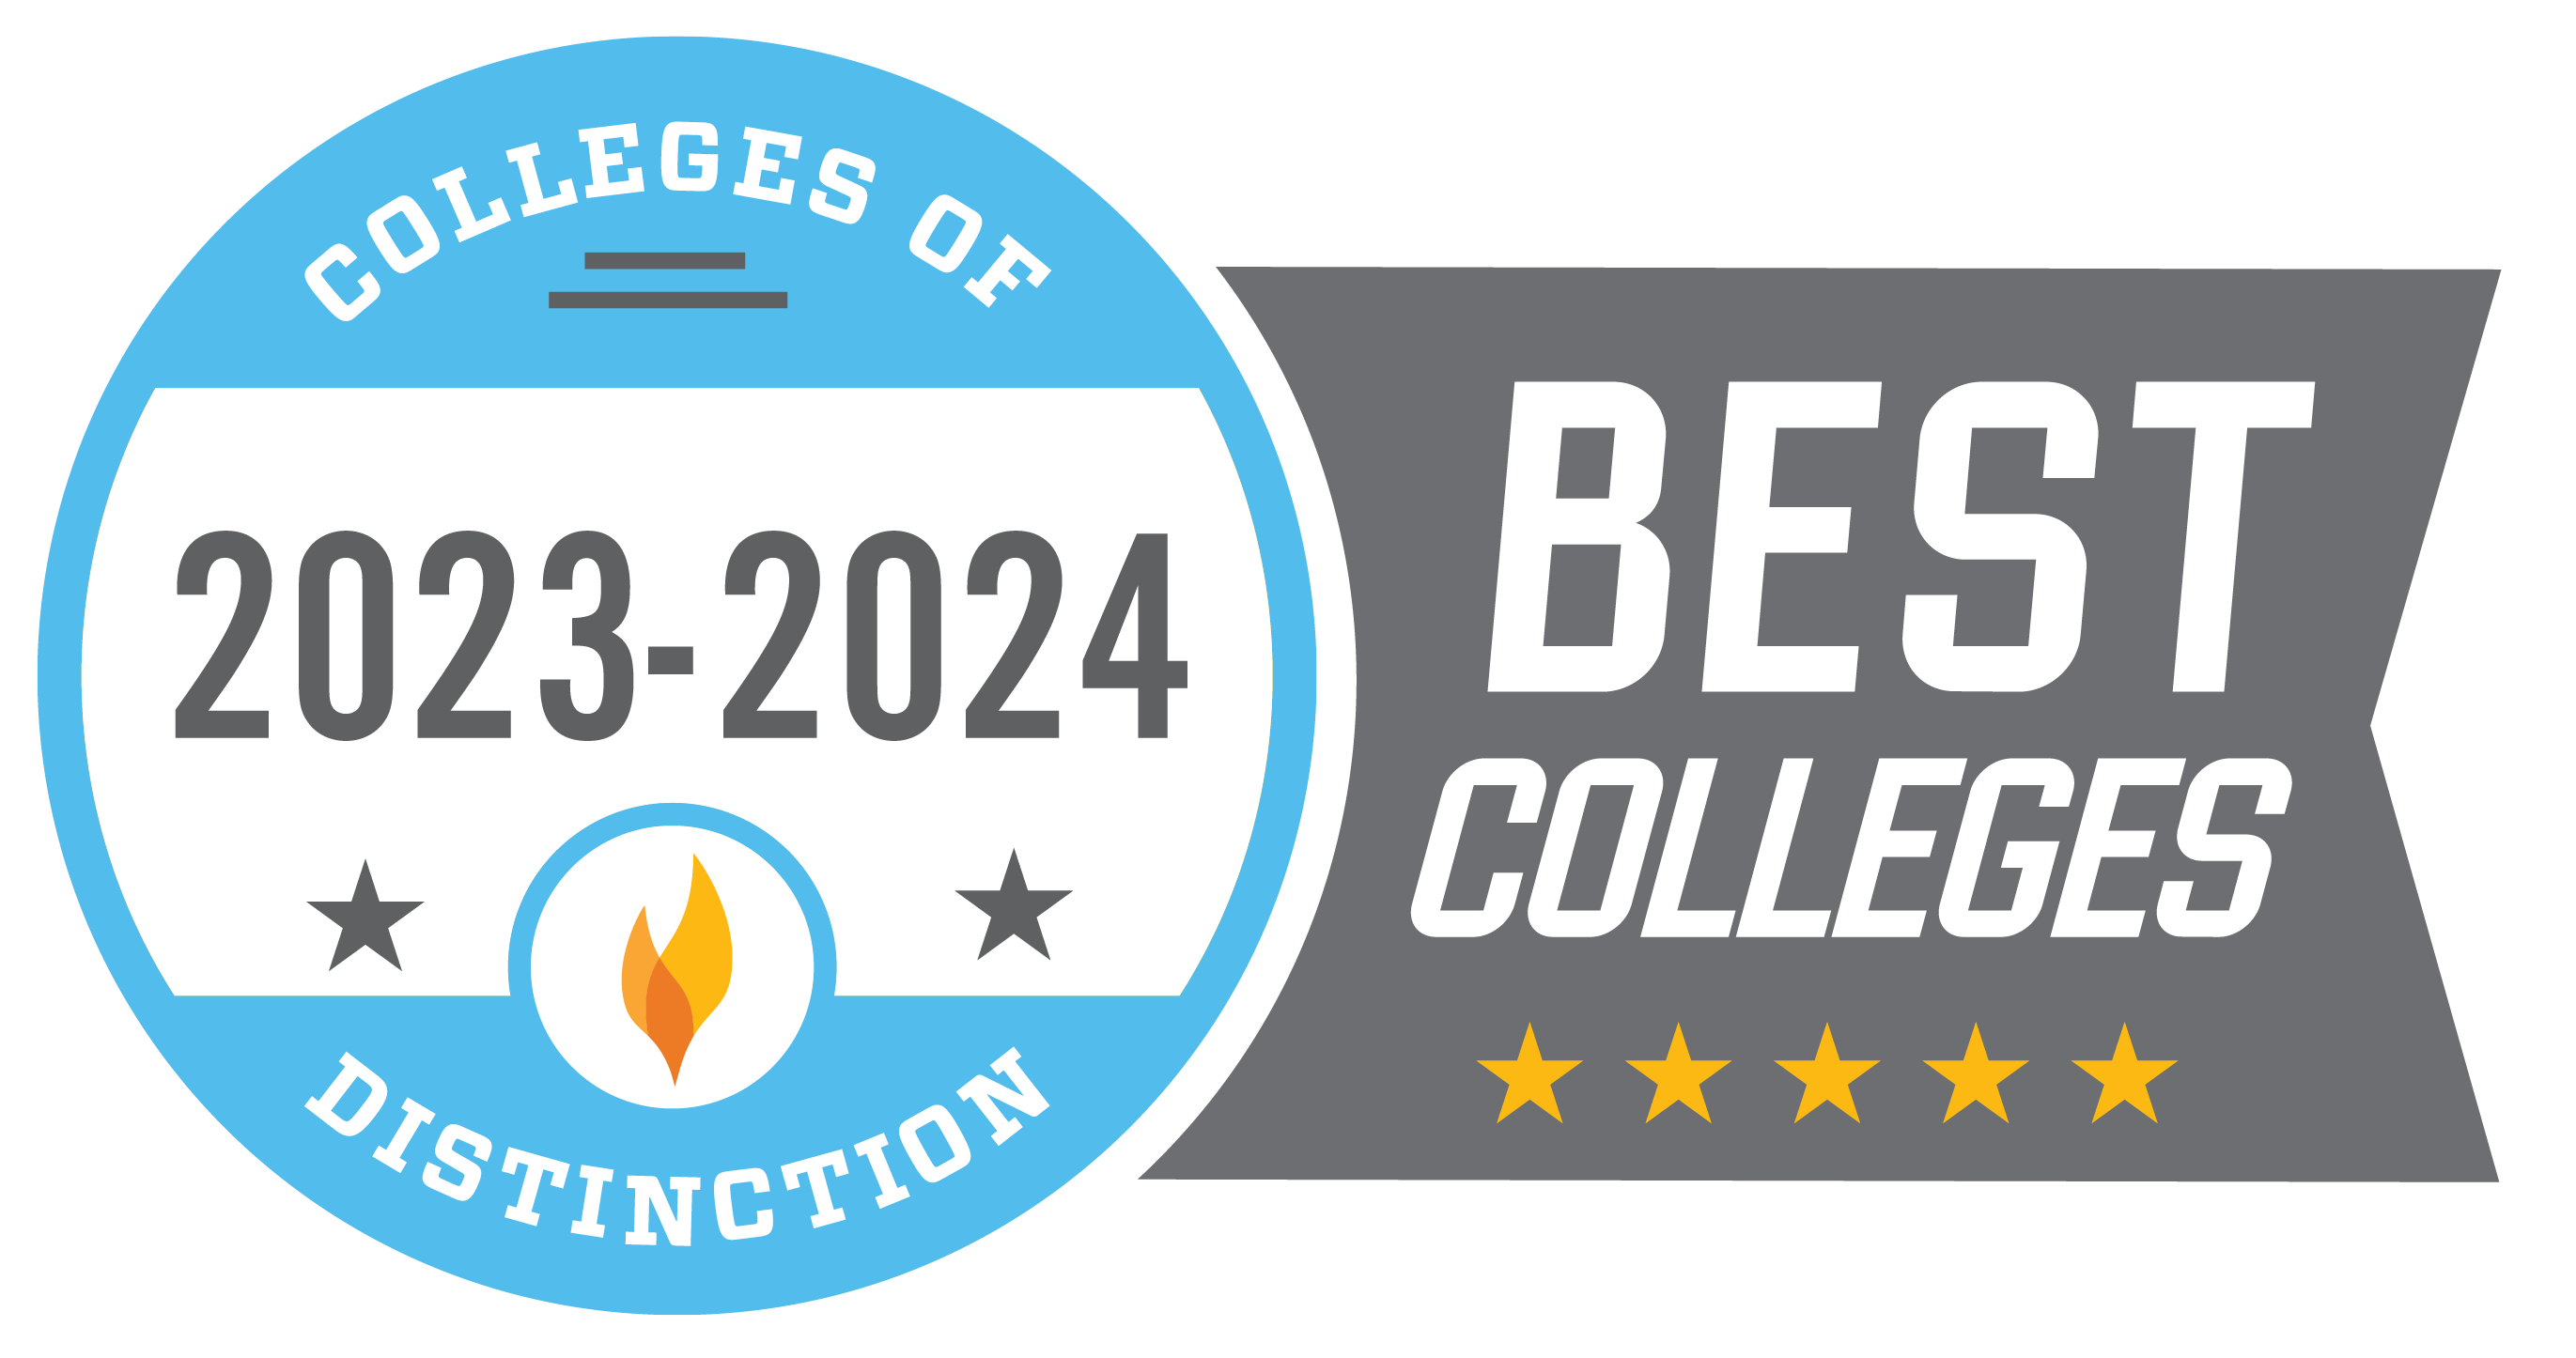 HardinSimmons University Honored as a 20232024 College of Distinction